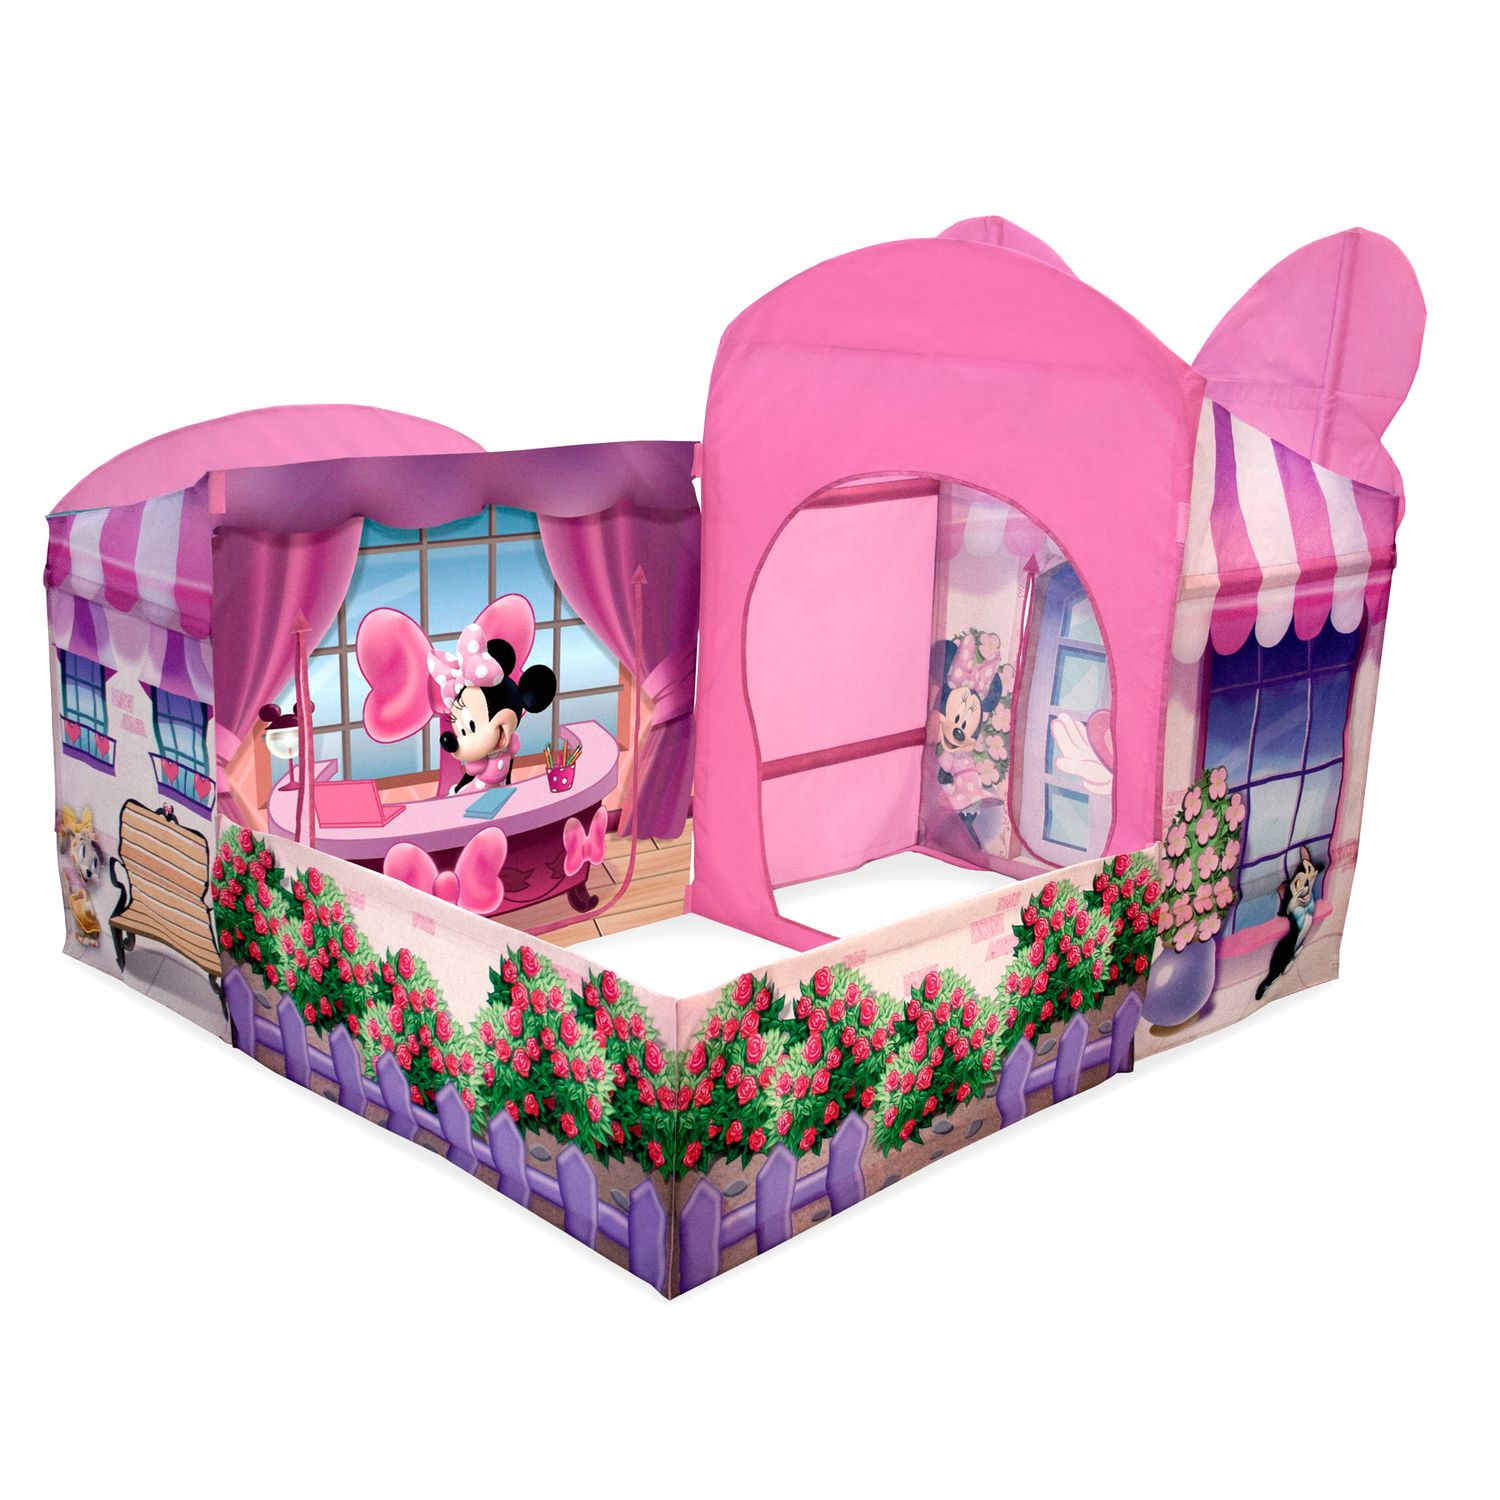 Minnie Mouse Minnie's Cottage by Playhut